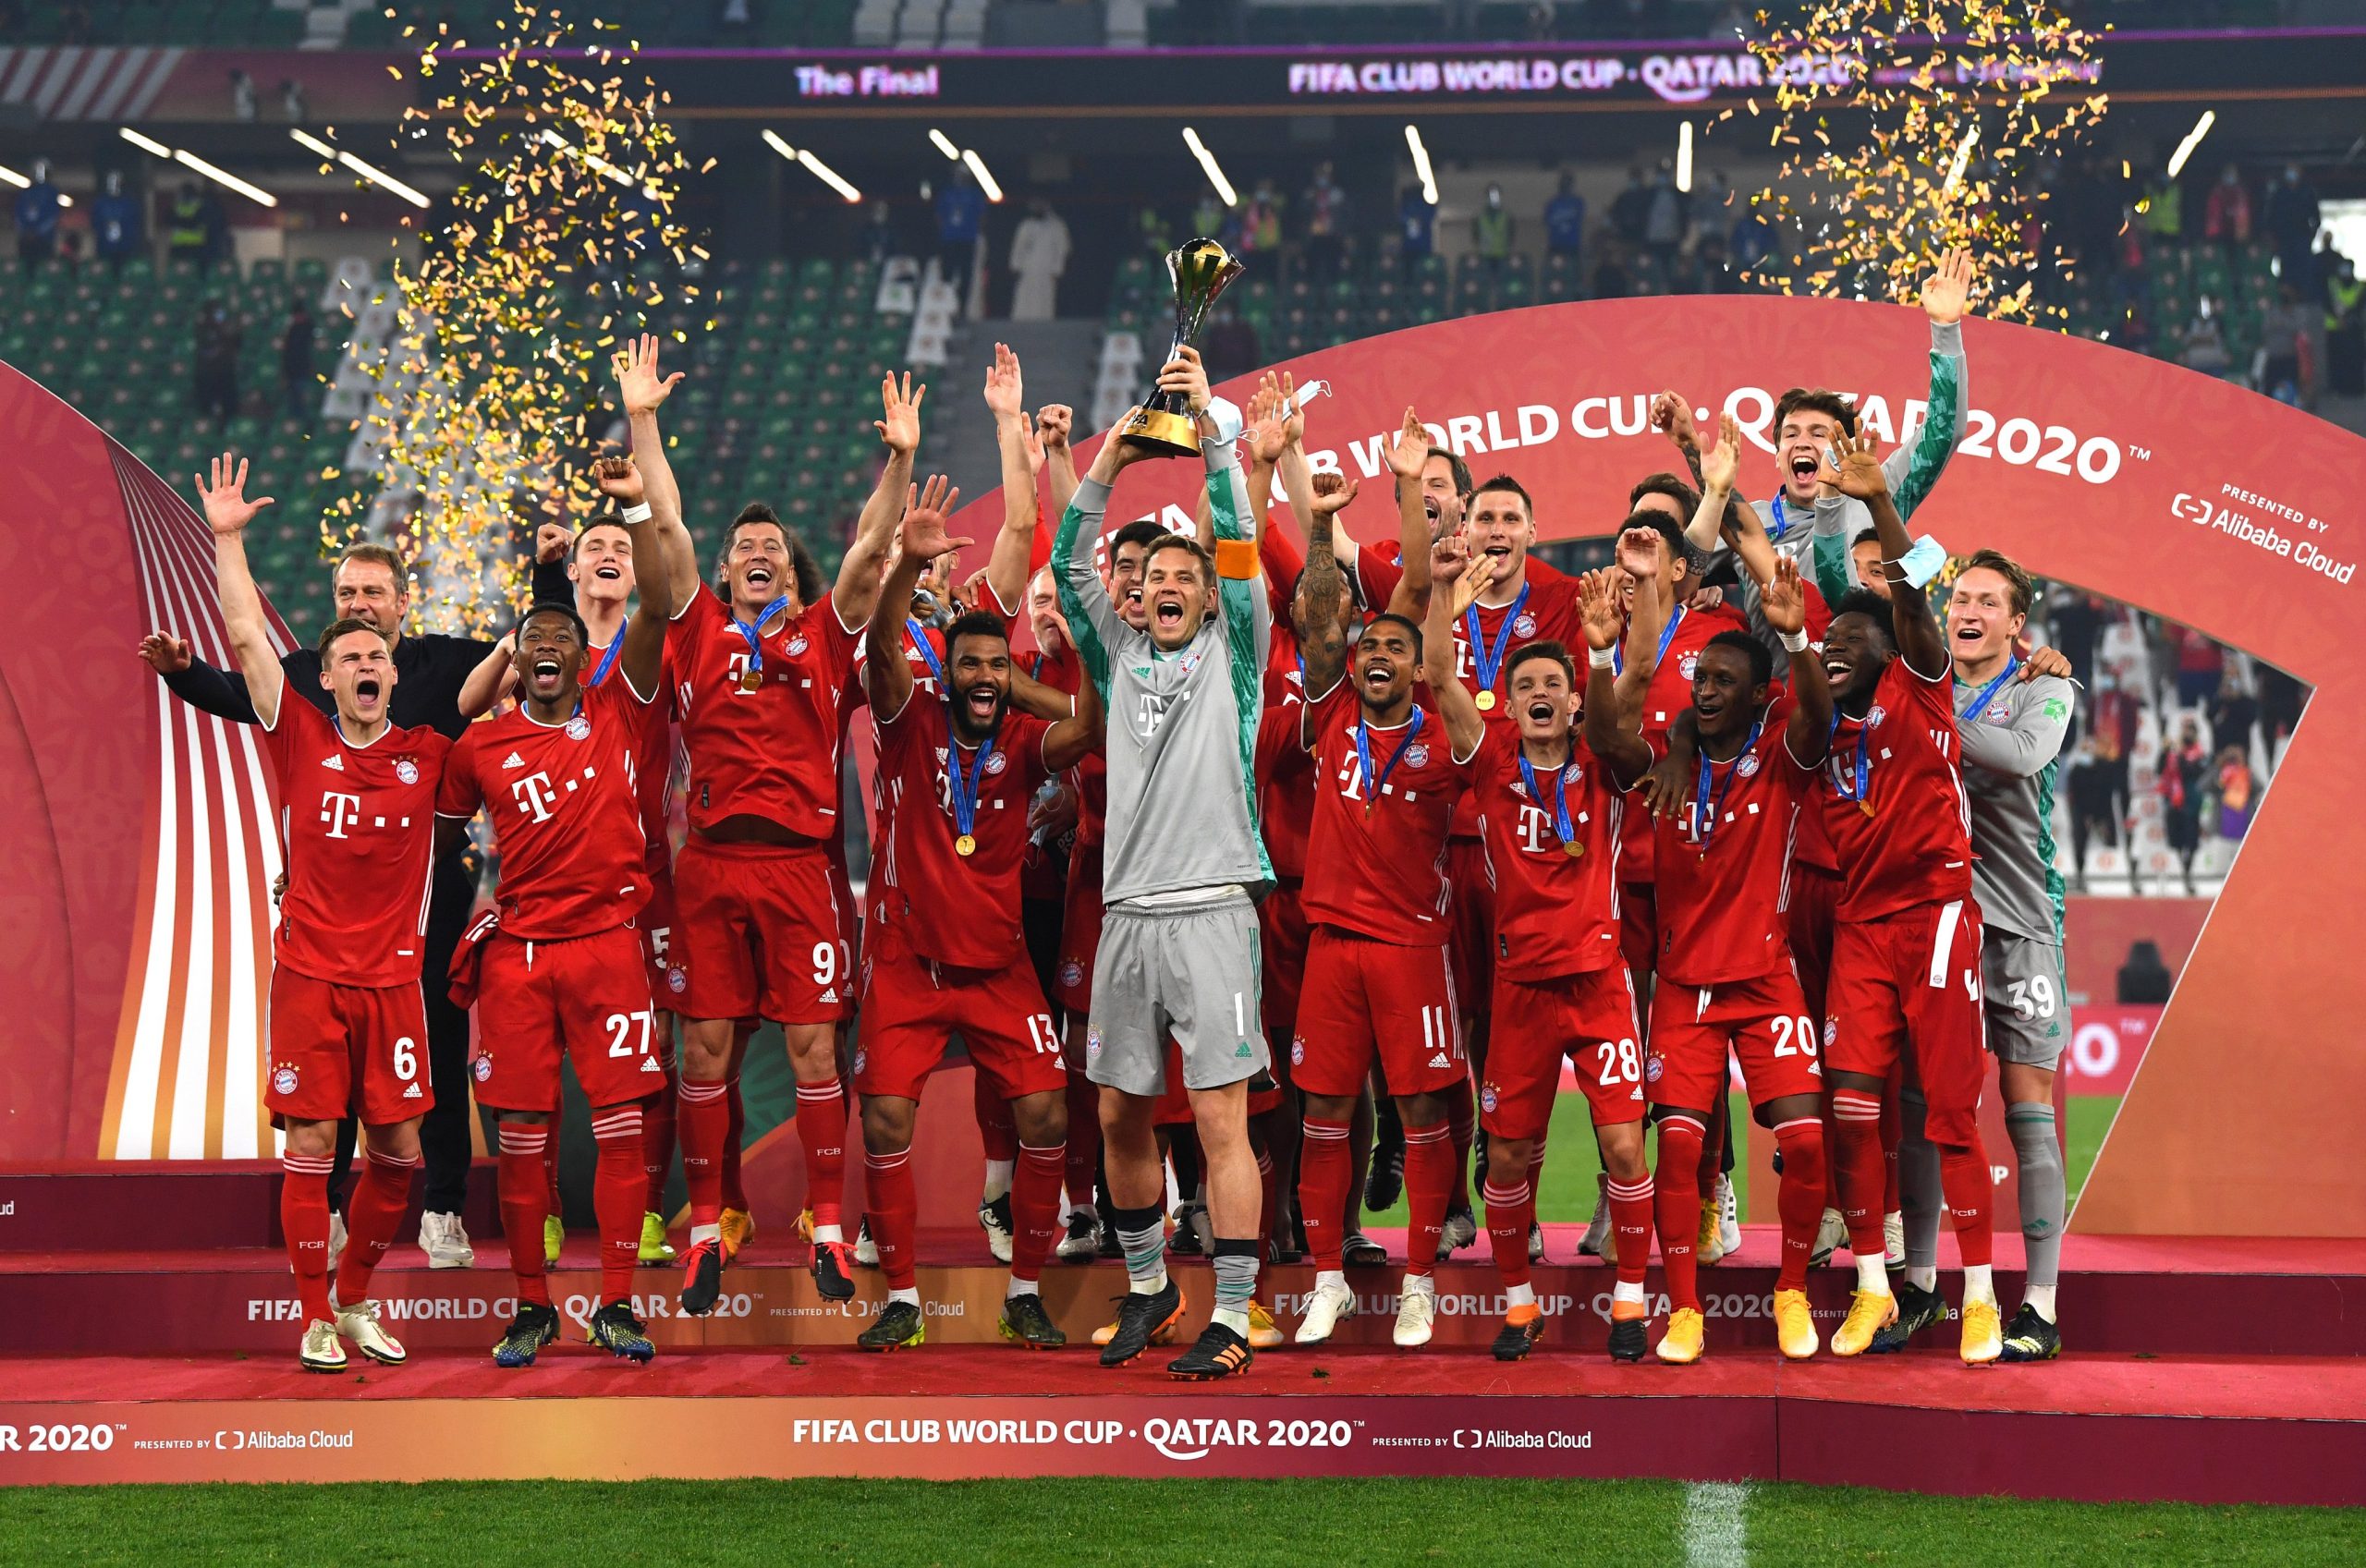 Bayern Crowned World Champions To Secure Sixth Title